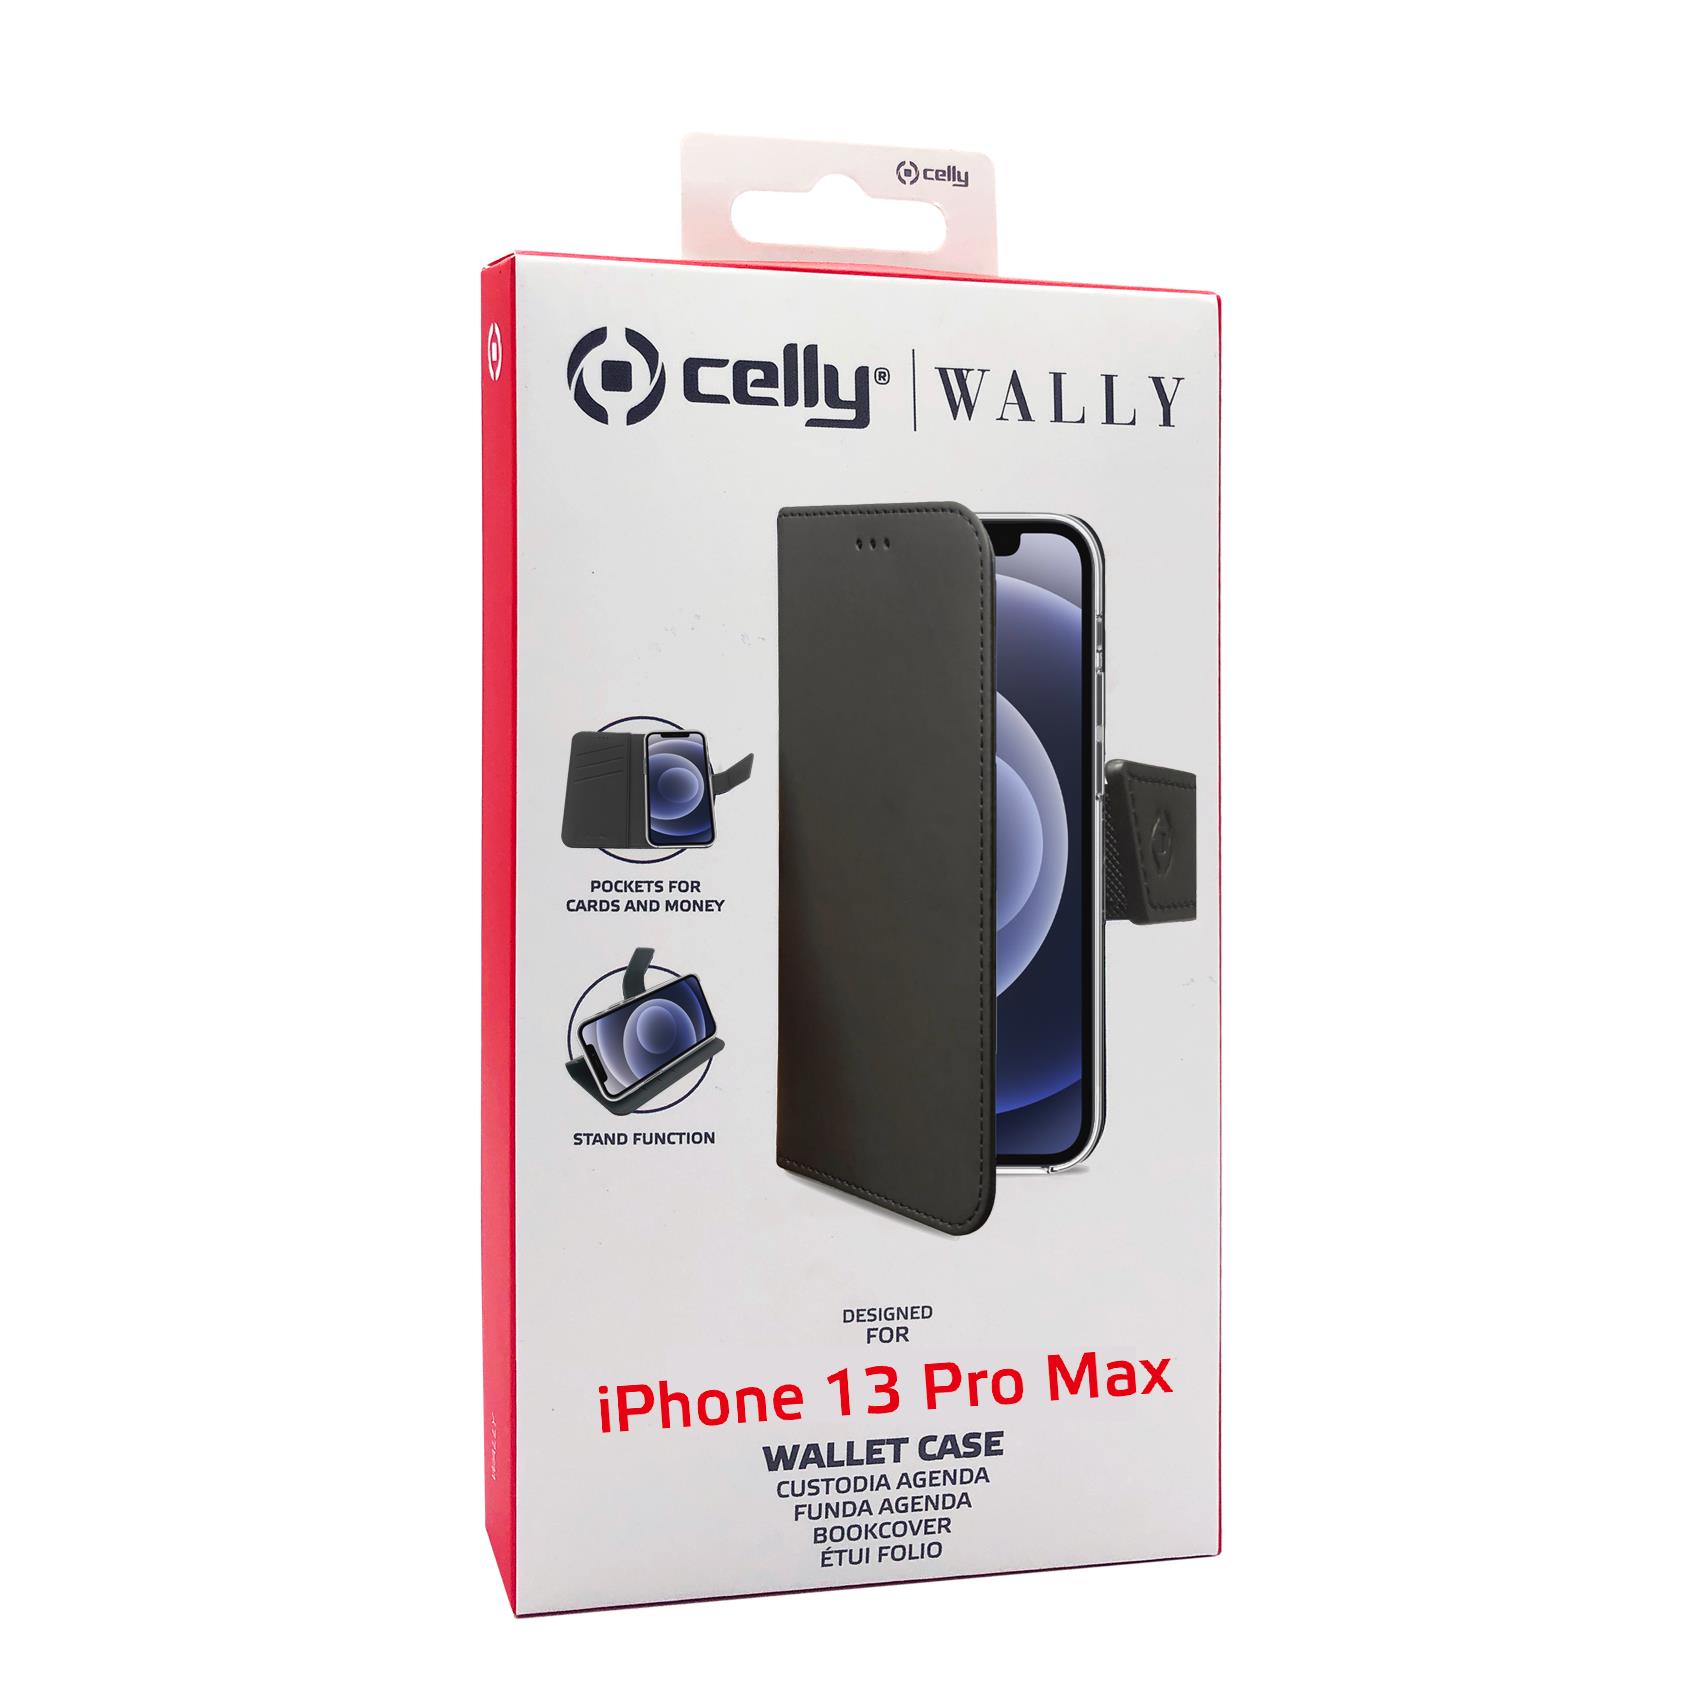 Wally Case Iphone 13 Pro Max Black Celly Wally1009 8021735190318